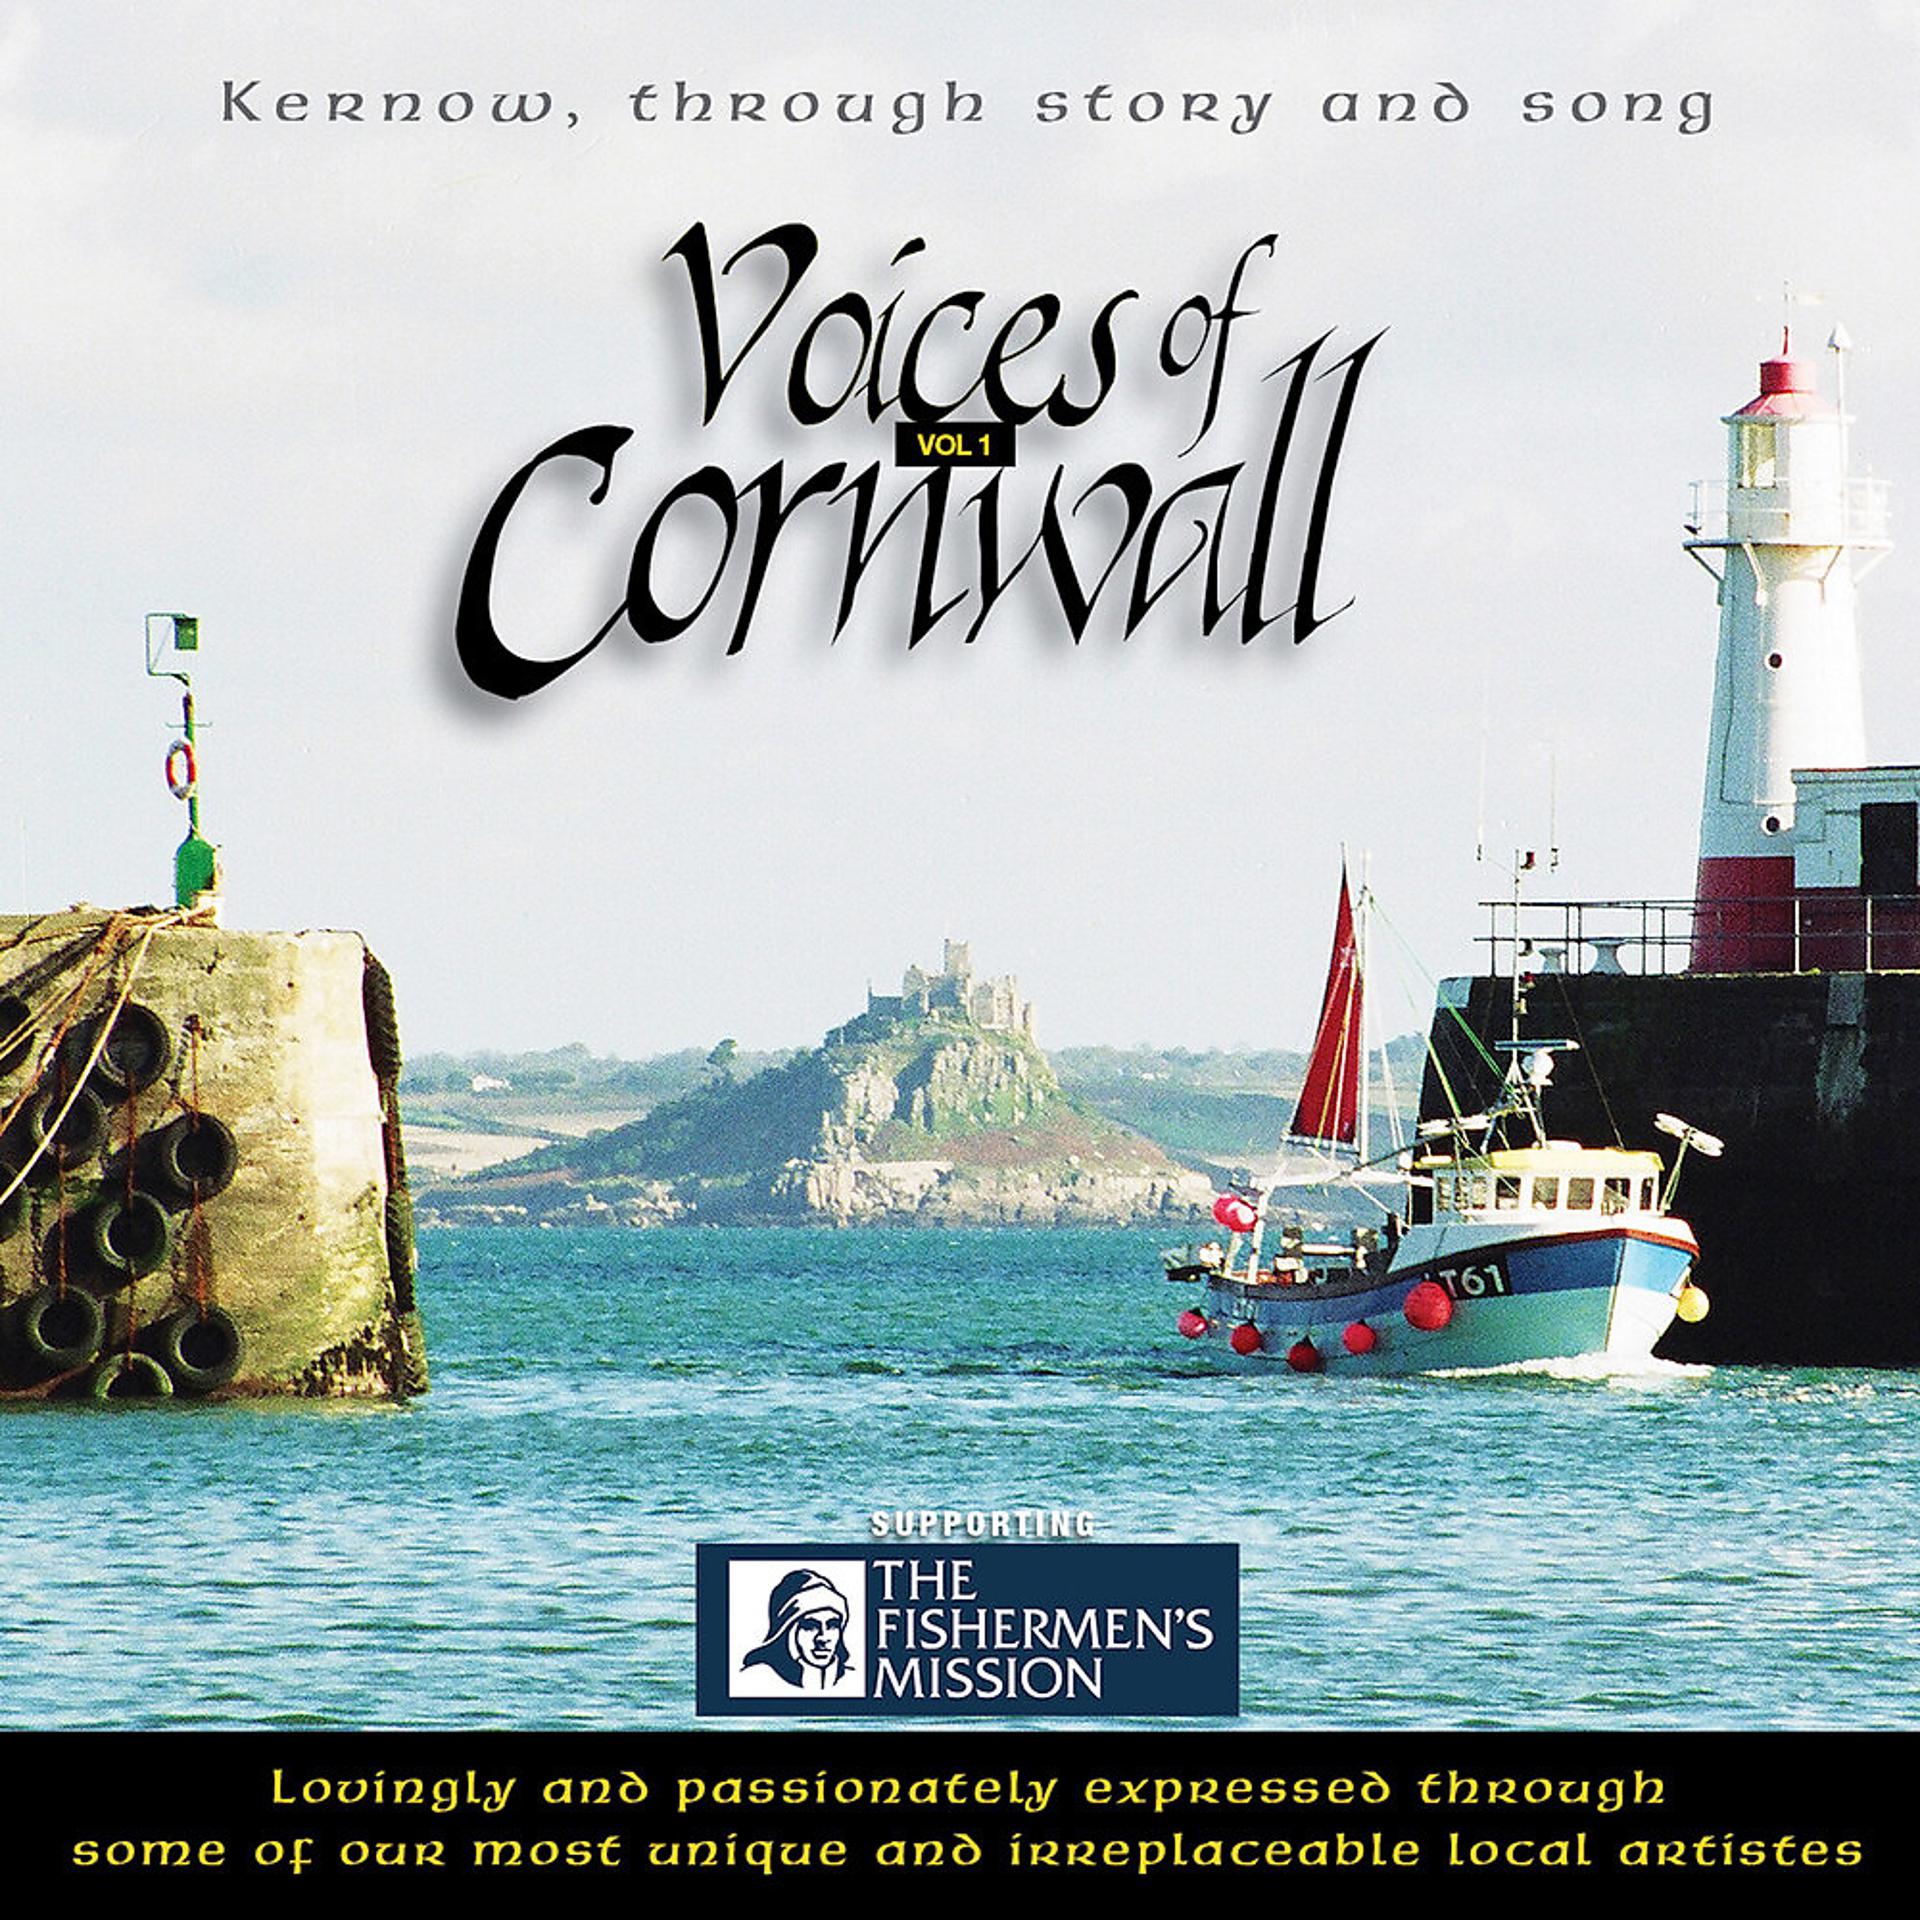 Постер альбома Voices of Cornwall (Kernow, Through Story and Song), Vol. 1